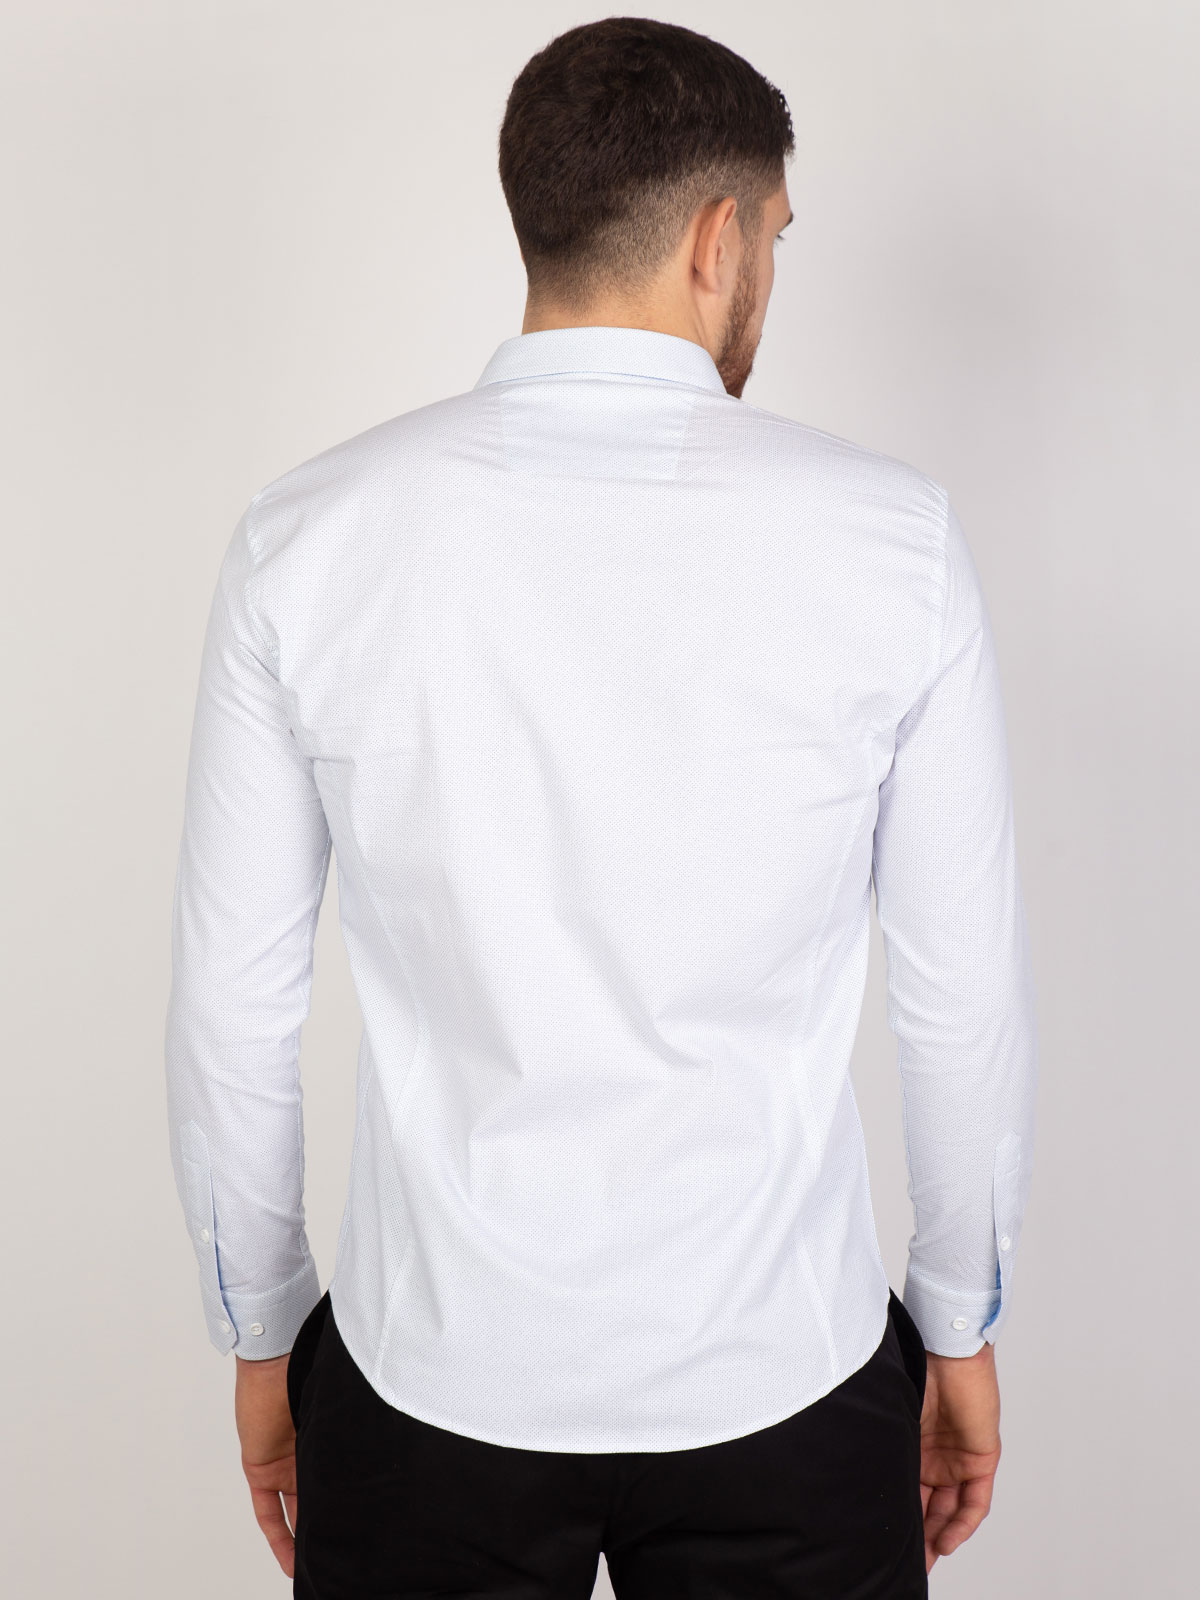 White shirt with small light blue dots - 21502 € 40.49 img4